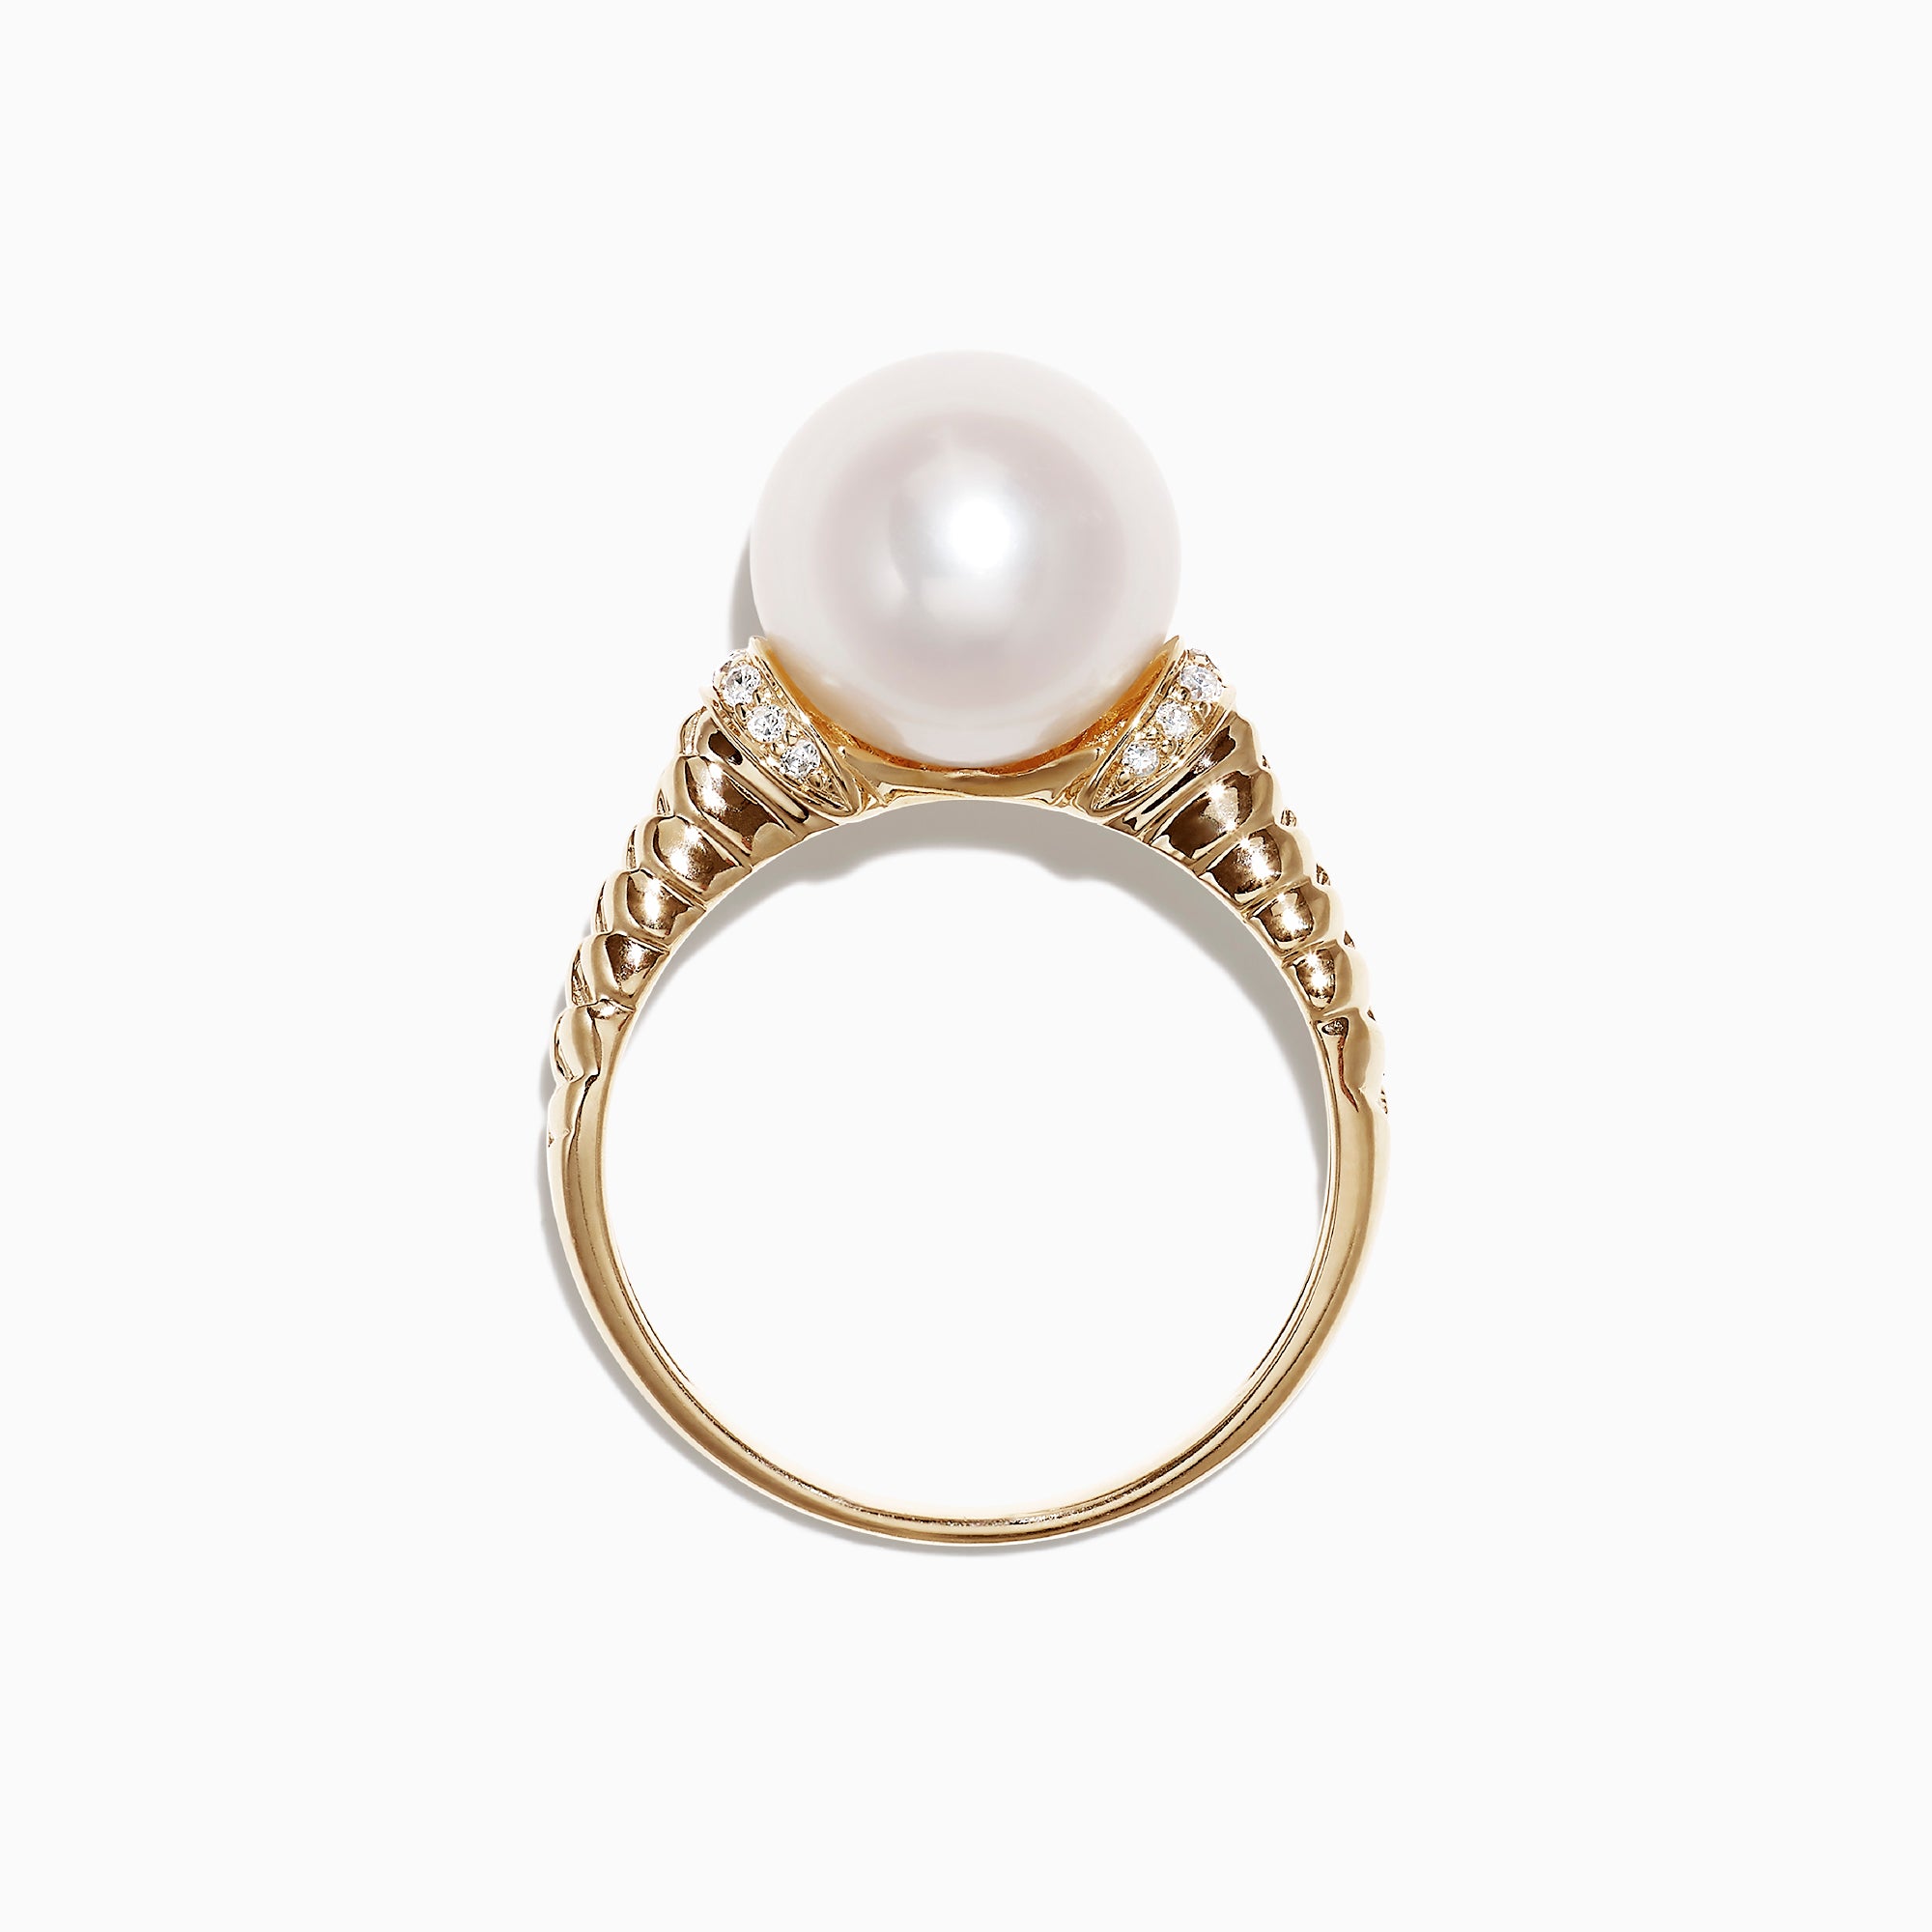 Effy 14K Yellow Gold Cultured Fresh Water Pearl and Diamond Ring, 0.06 TCW